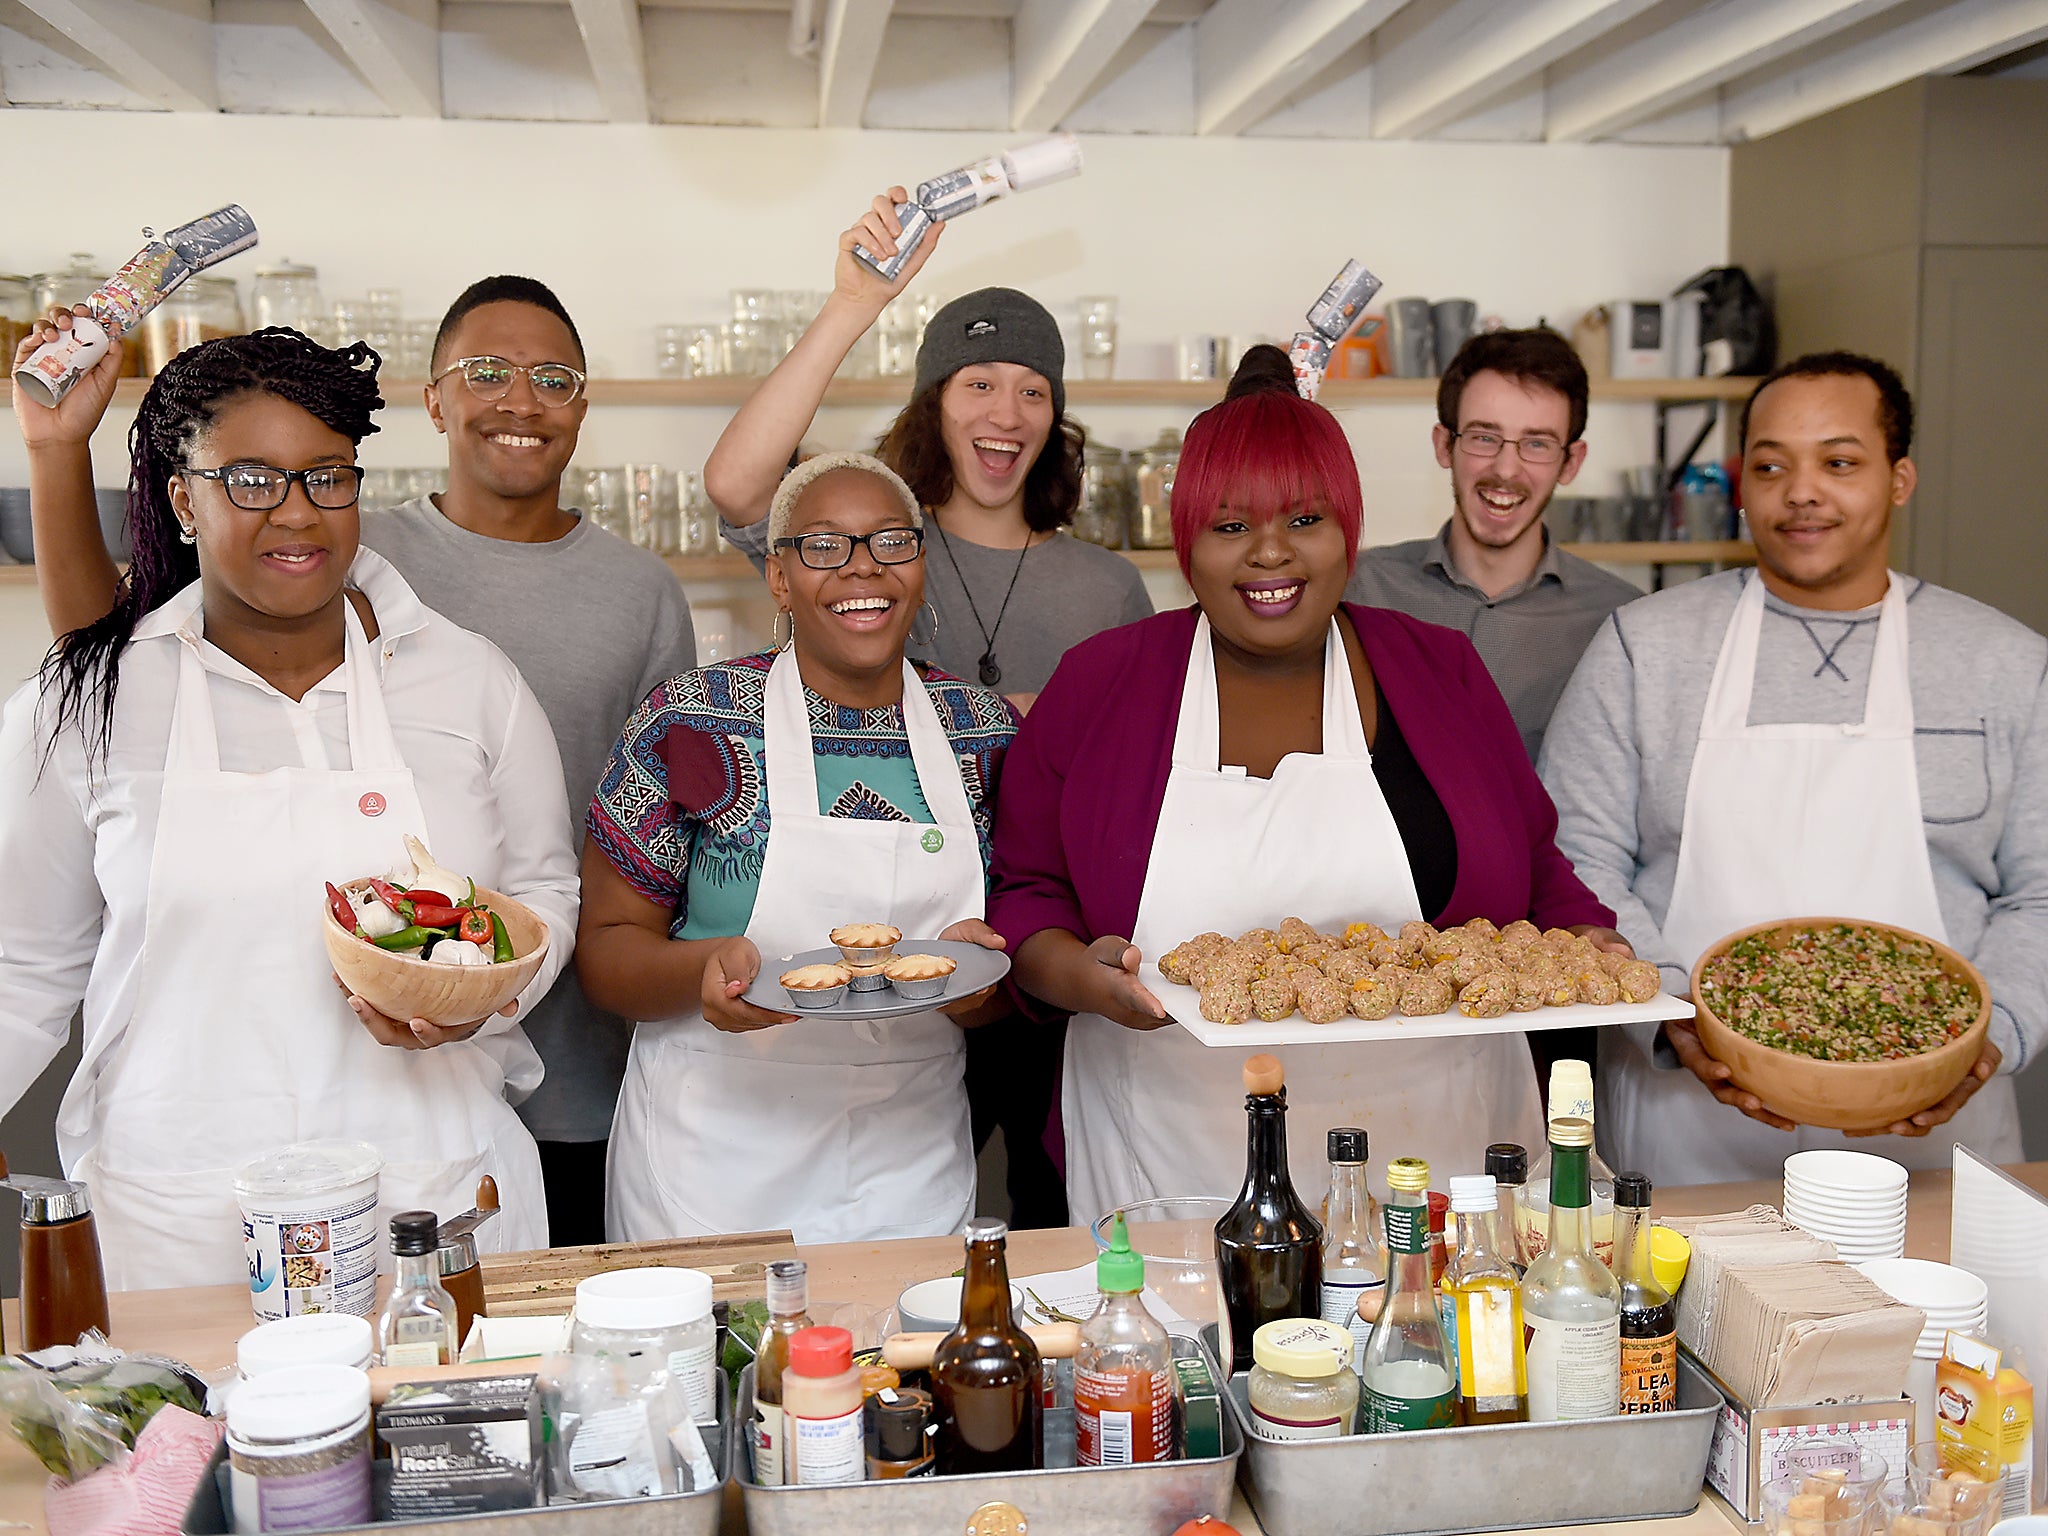 Airbnb backed the Young and Homeless Helpline appeal in an announcement at a cookery class for Centrepoint residents